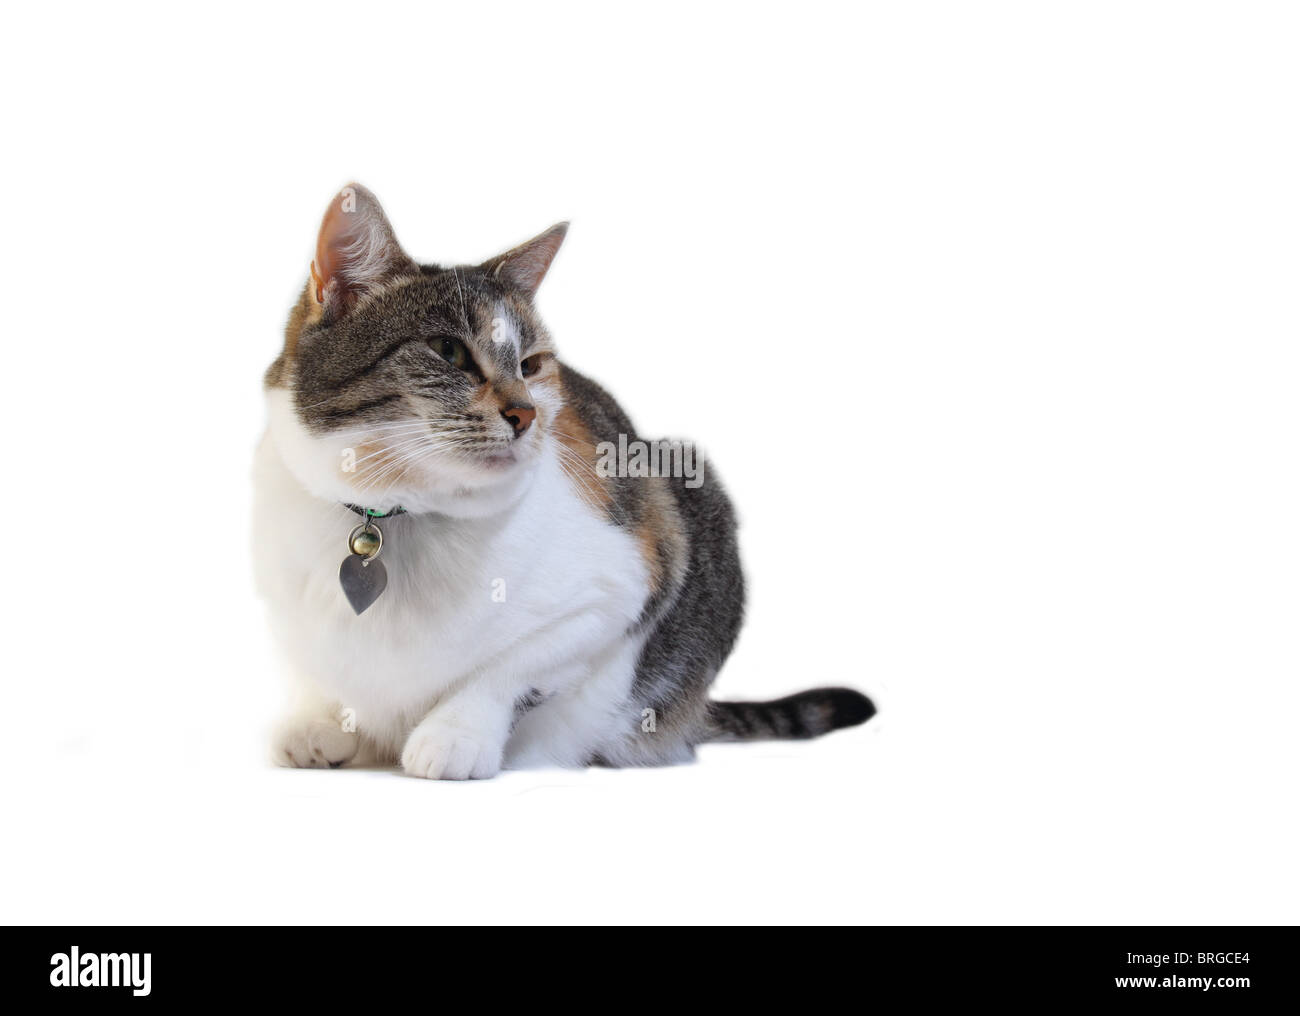 Domestic short-haired cat Stock Photo